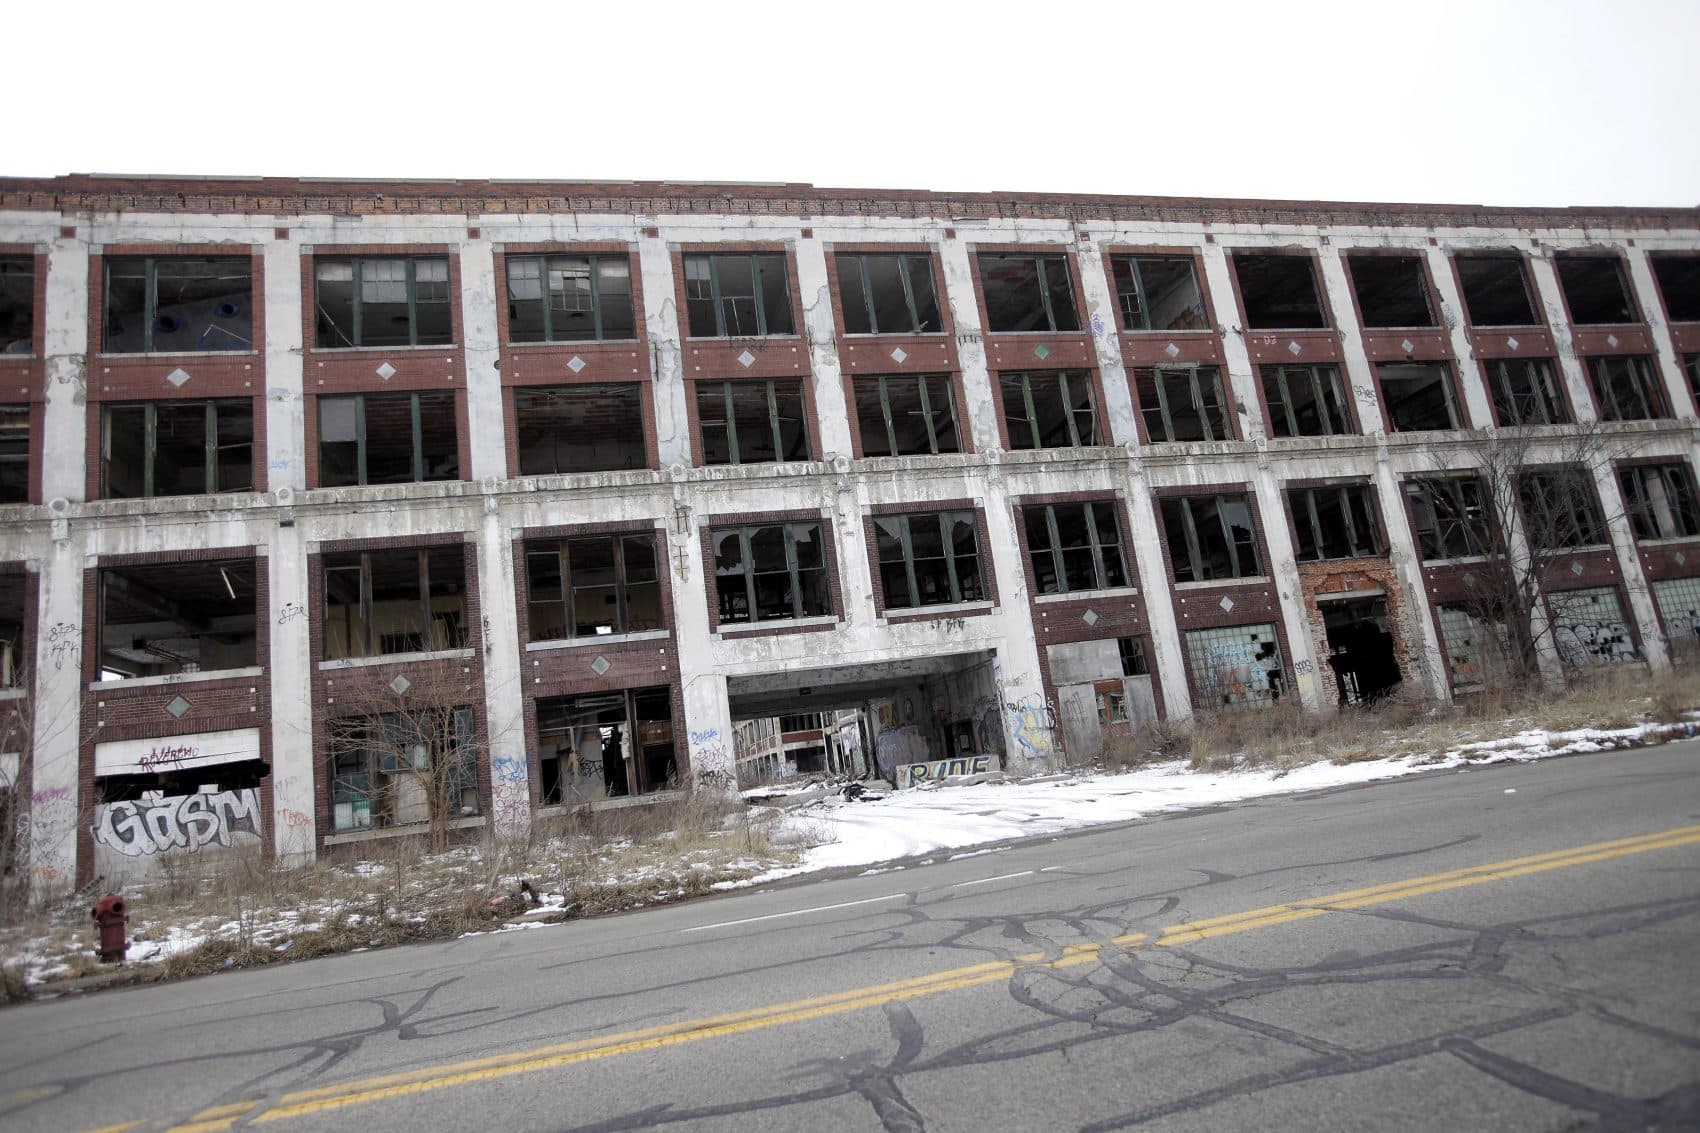 The former Packard Plant in Detroit in February 2013. (J.D. Pooley/Getty Images)